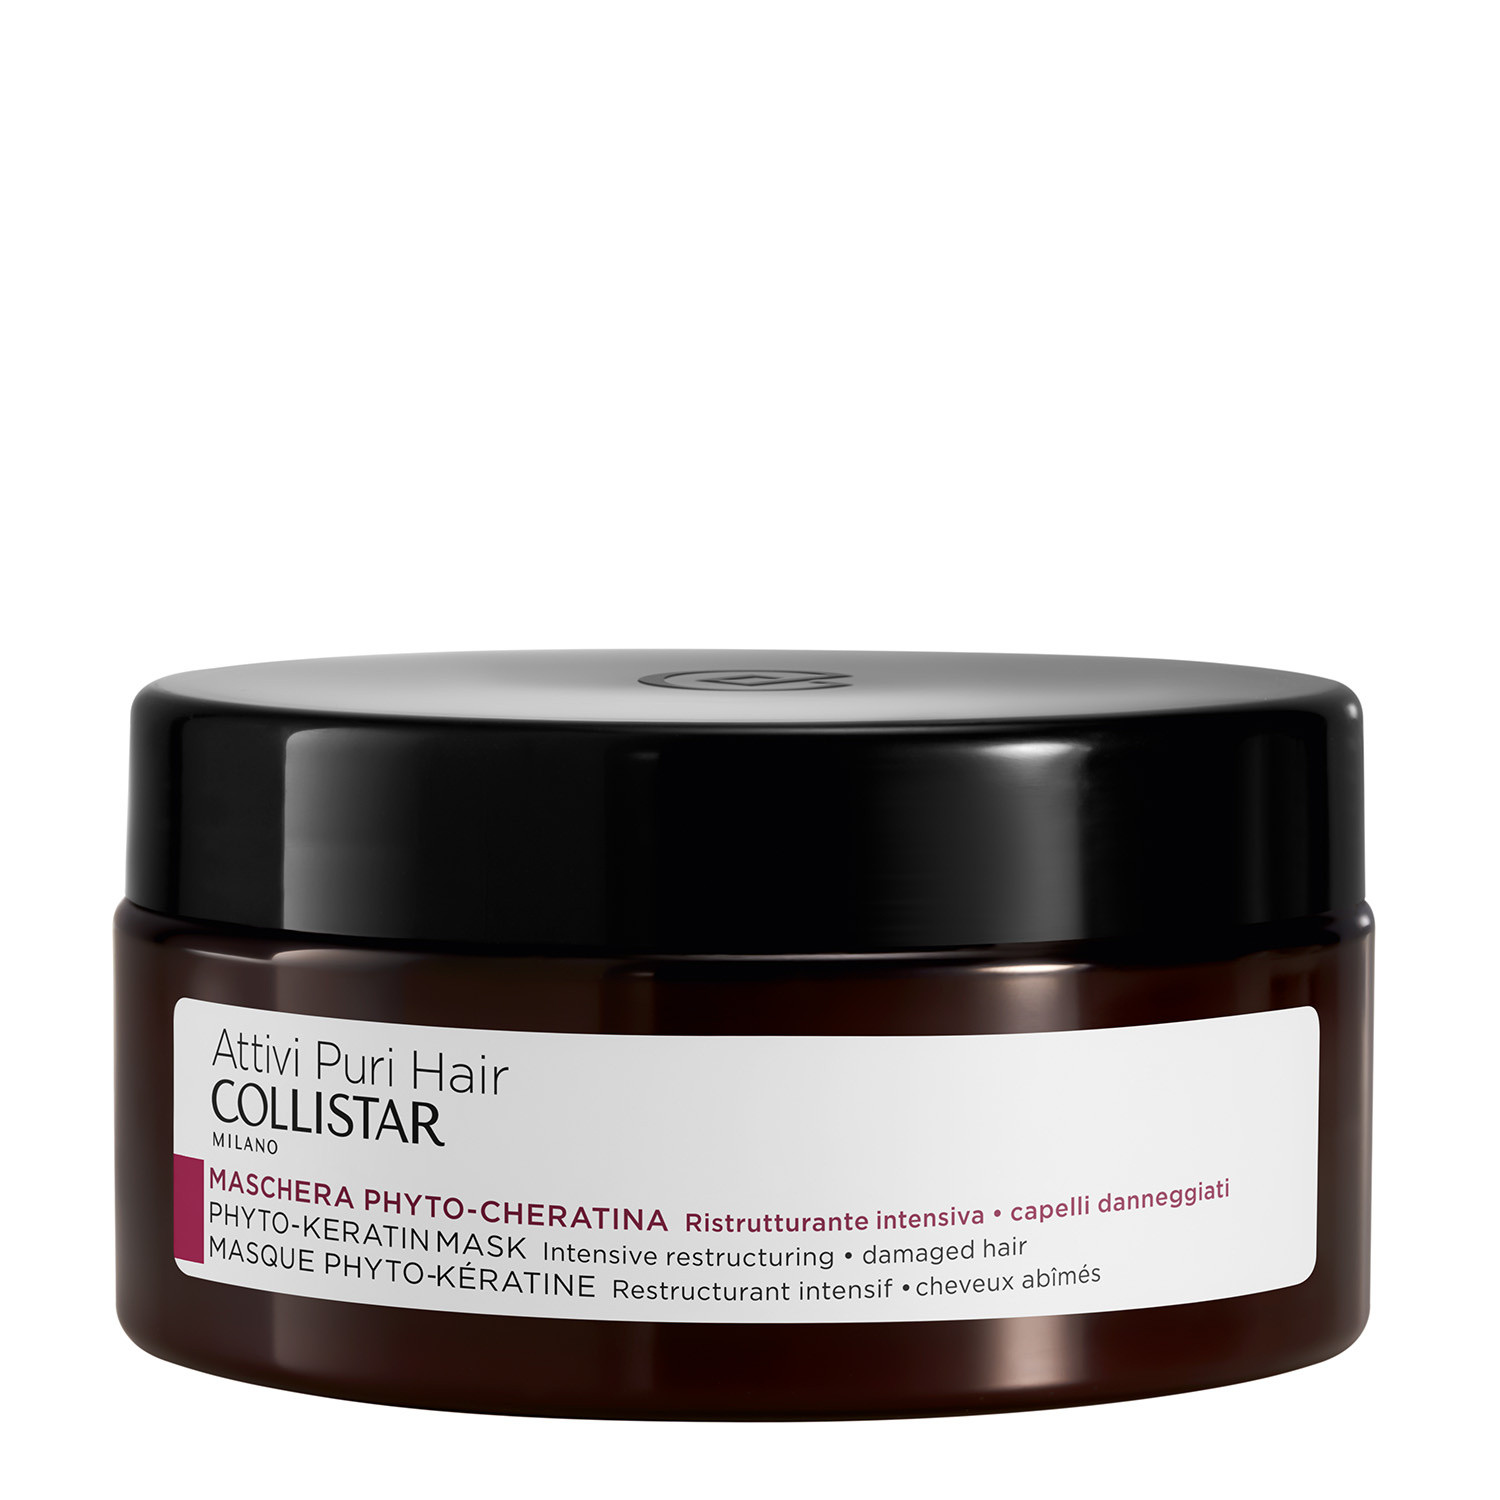 Collistar - Phyto-Keratin Mask, Multicolor, large image number 0